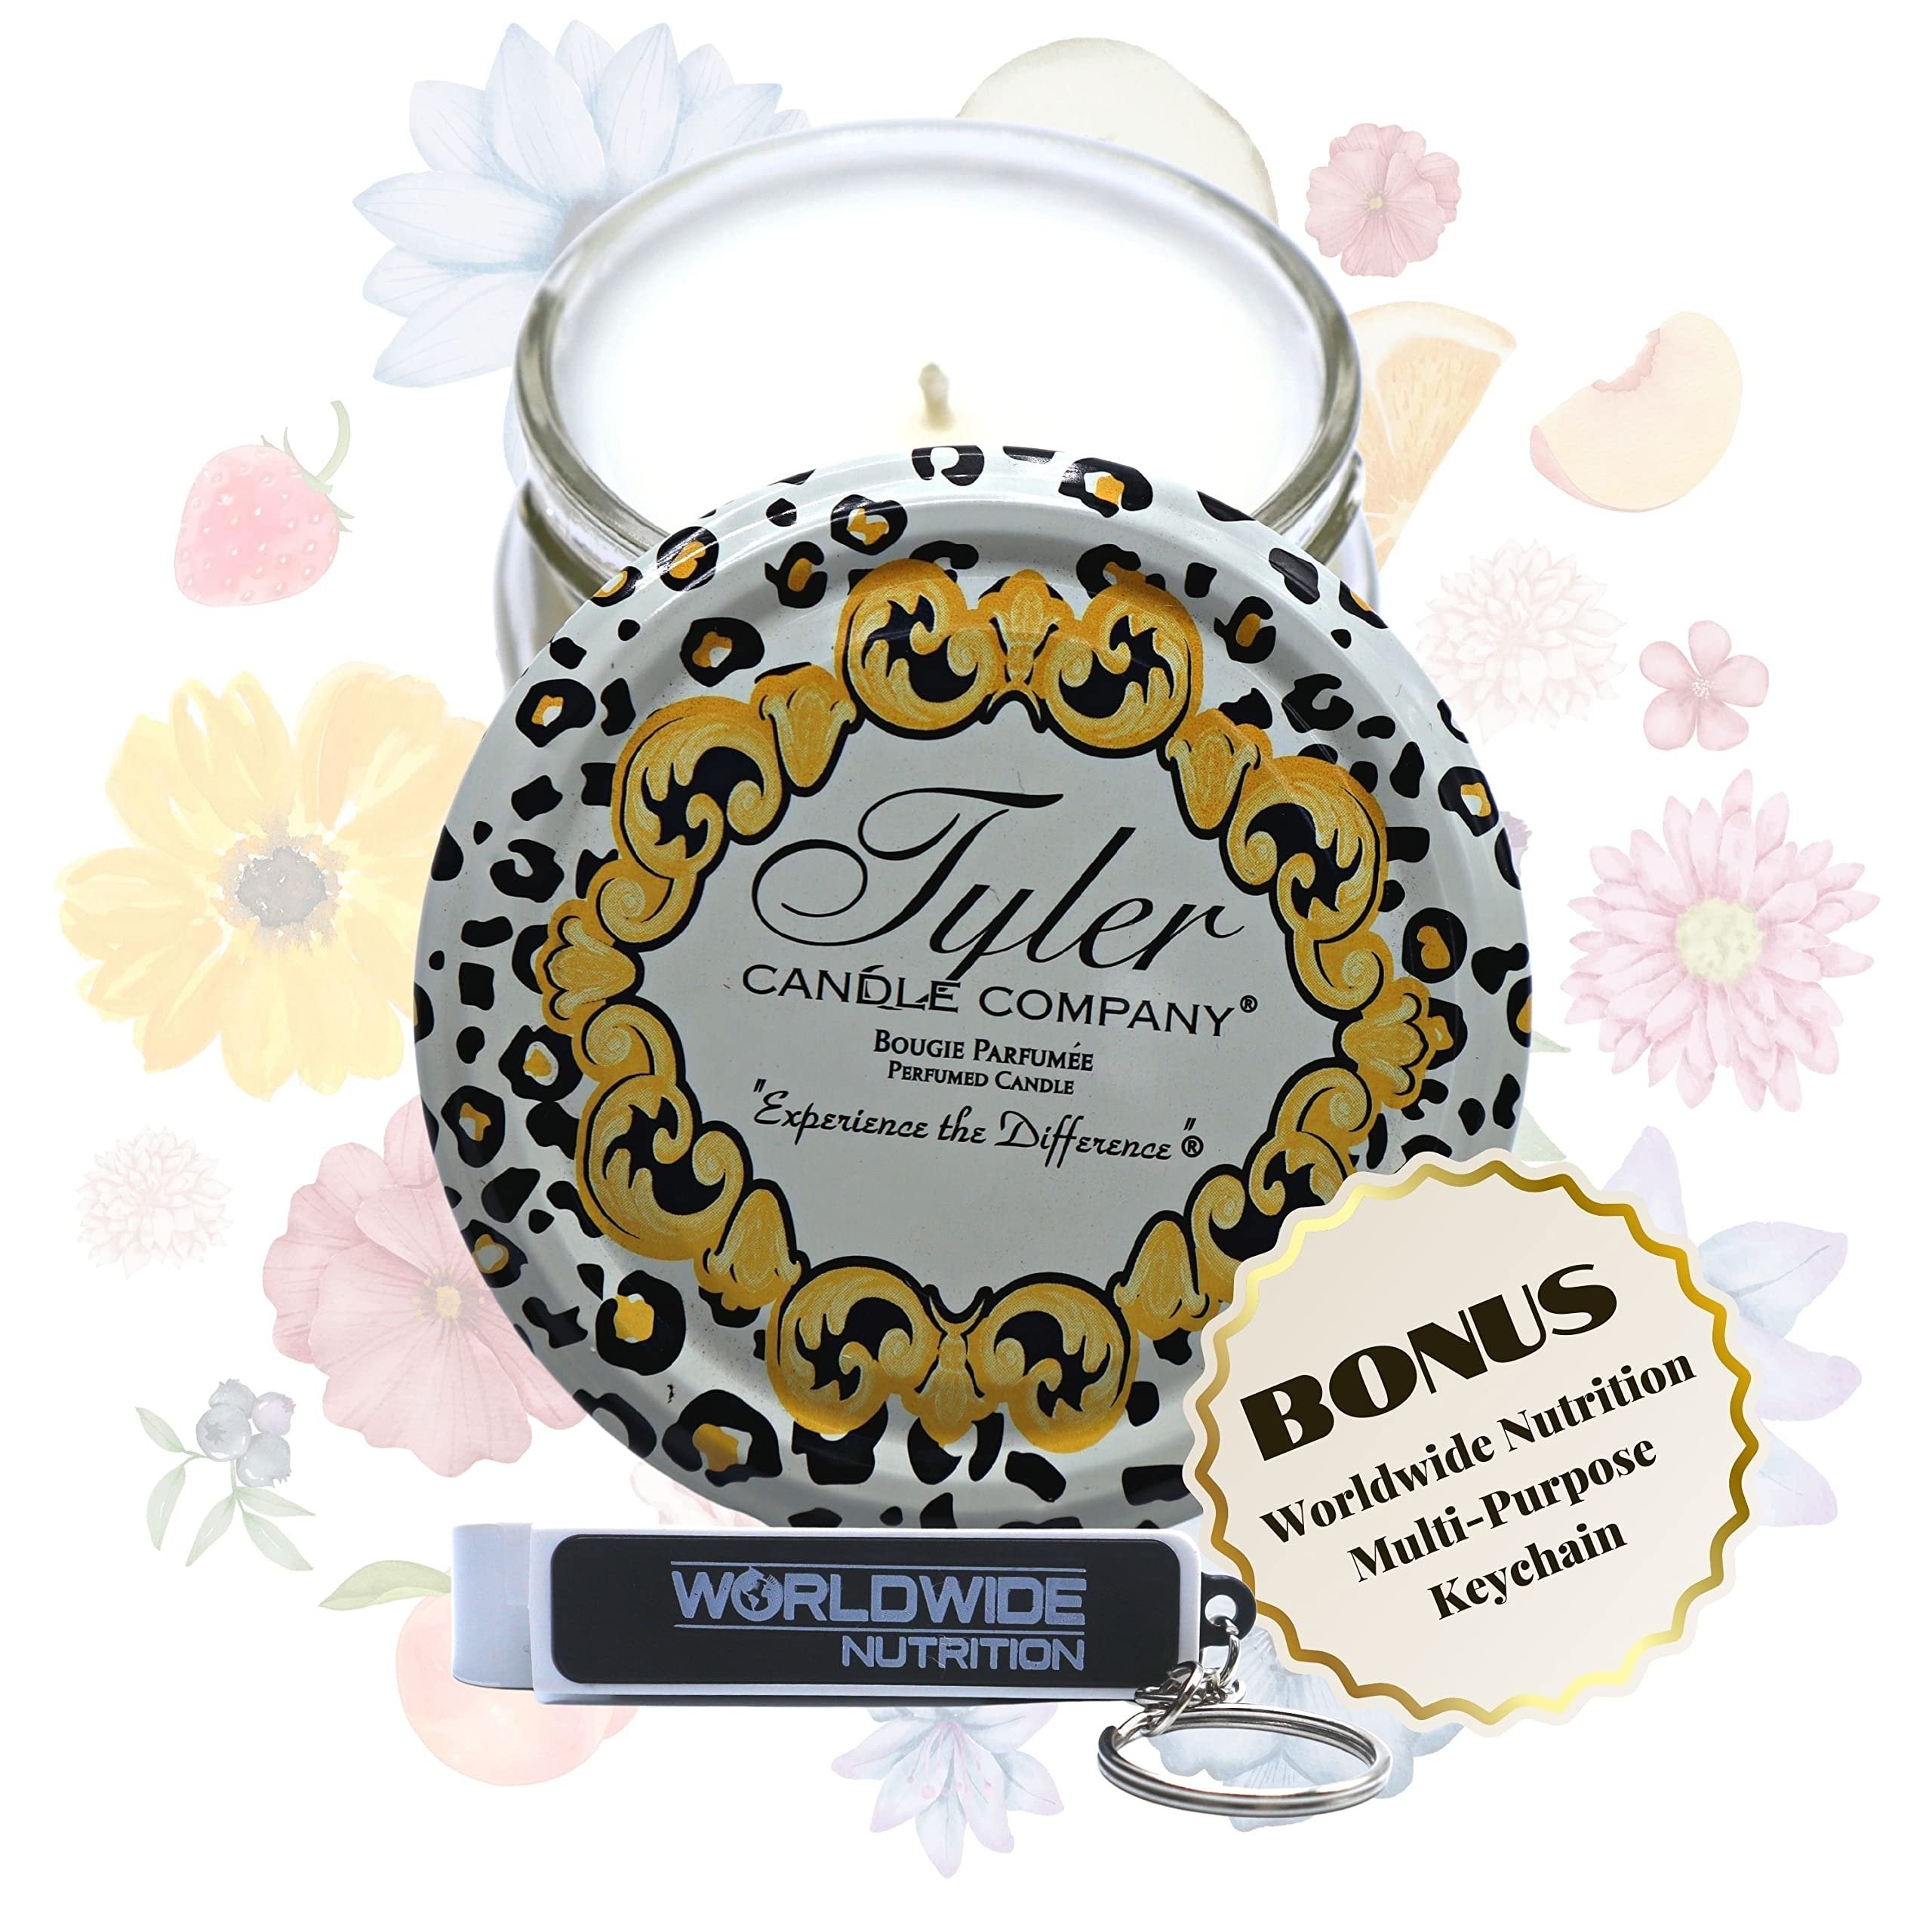 Tyler Candle Company Regal Jar Candle - Luxurious Scented Candle with Essential Oils - Long Burning Candles 20 to 25 Hours - 3.4 oz with Bonus Worldwide Nutrition Multi Purpose Key Chain